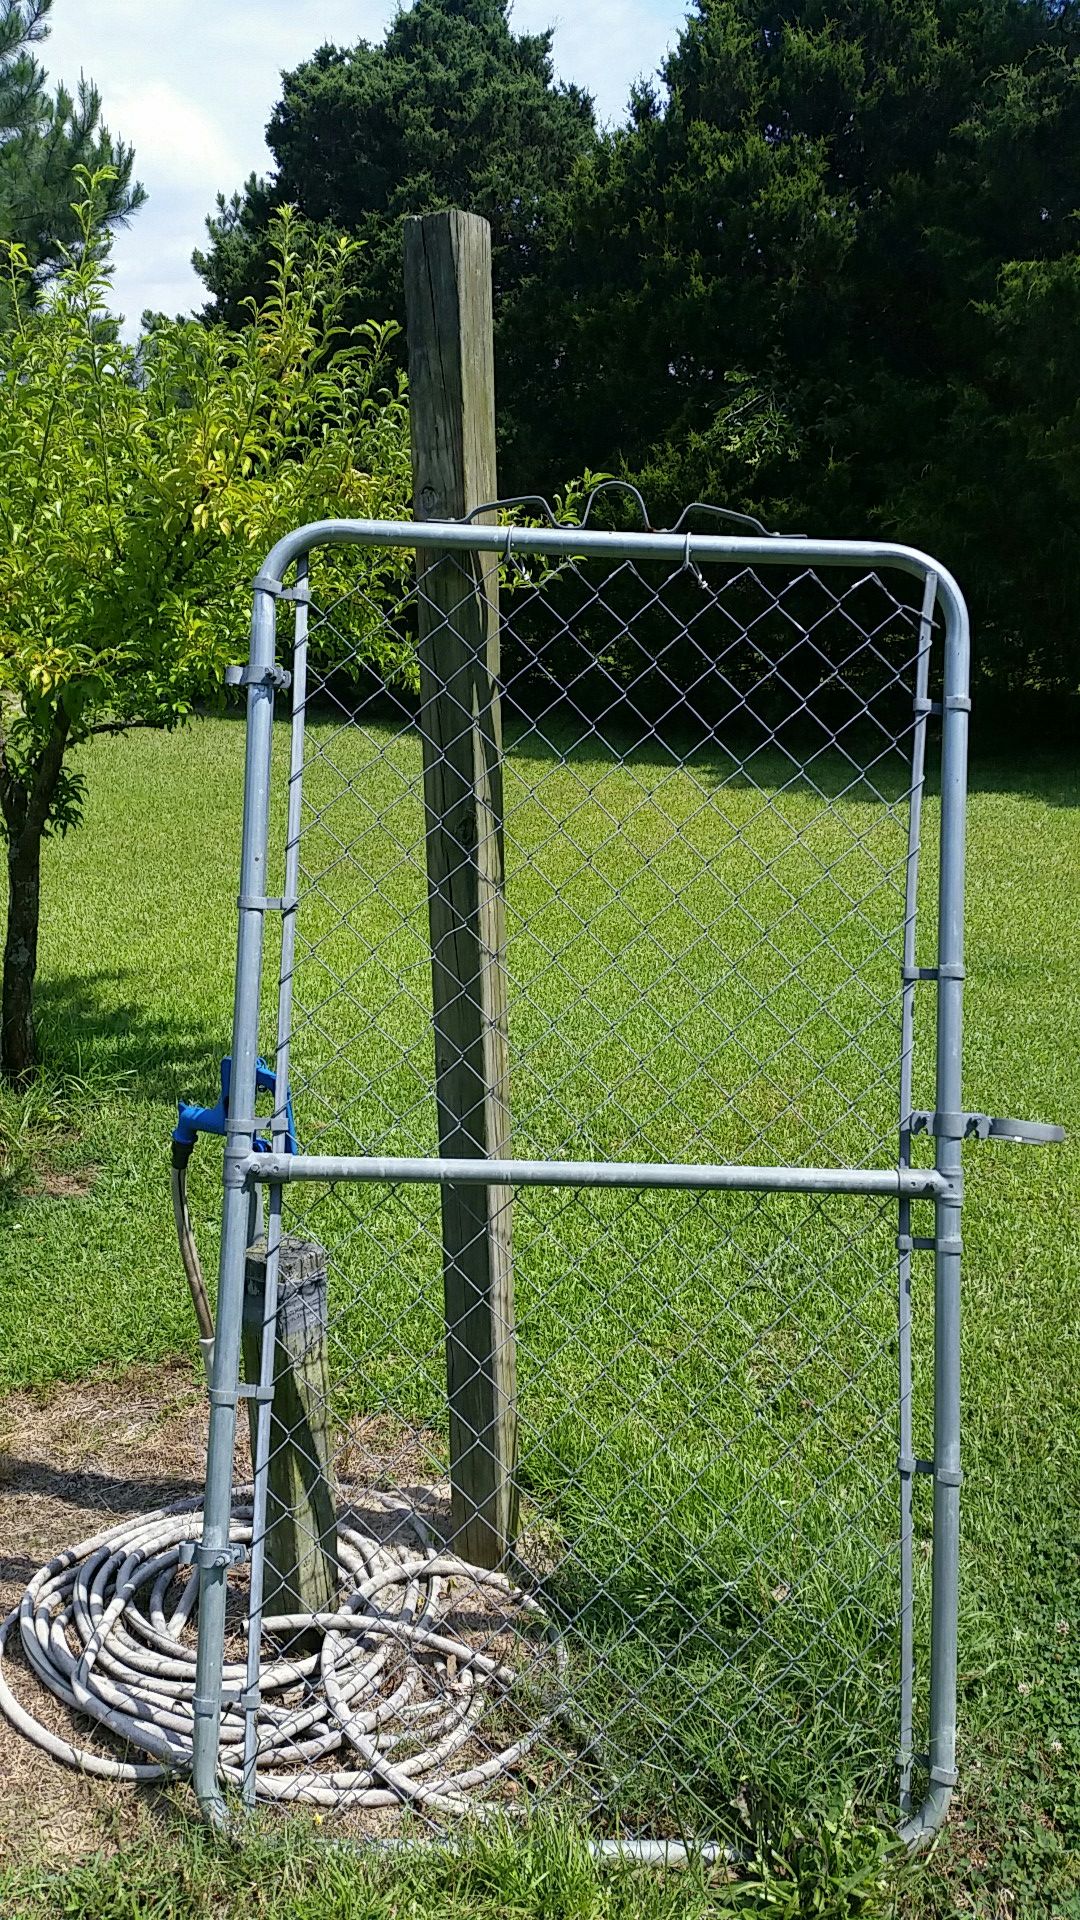 6 ft chain link gates (4) 2 are home made and 2 are store bought. Very sturdy.